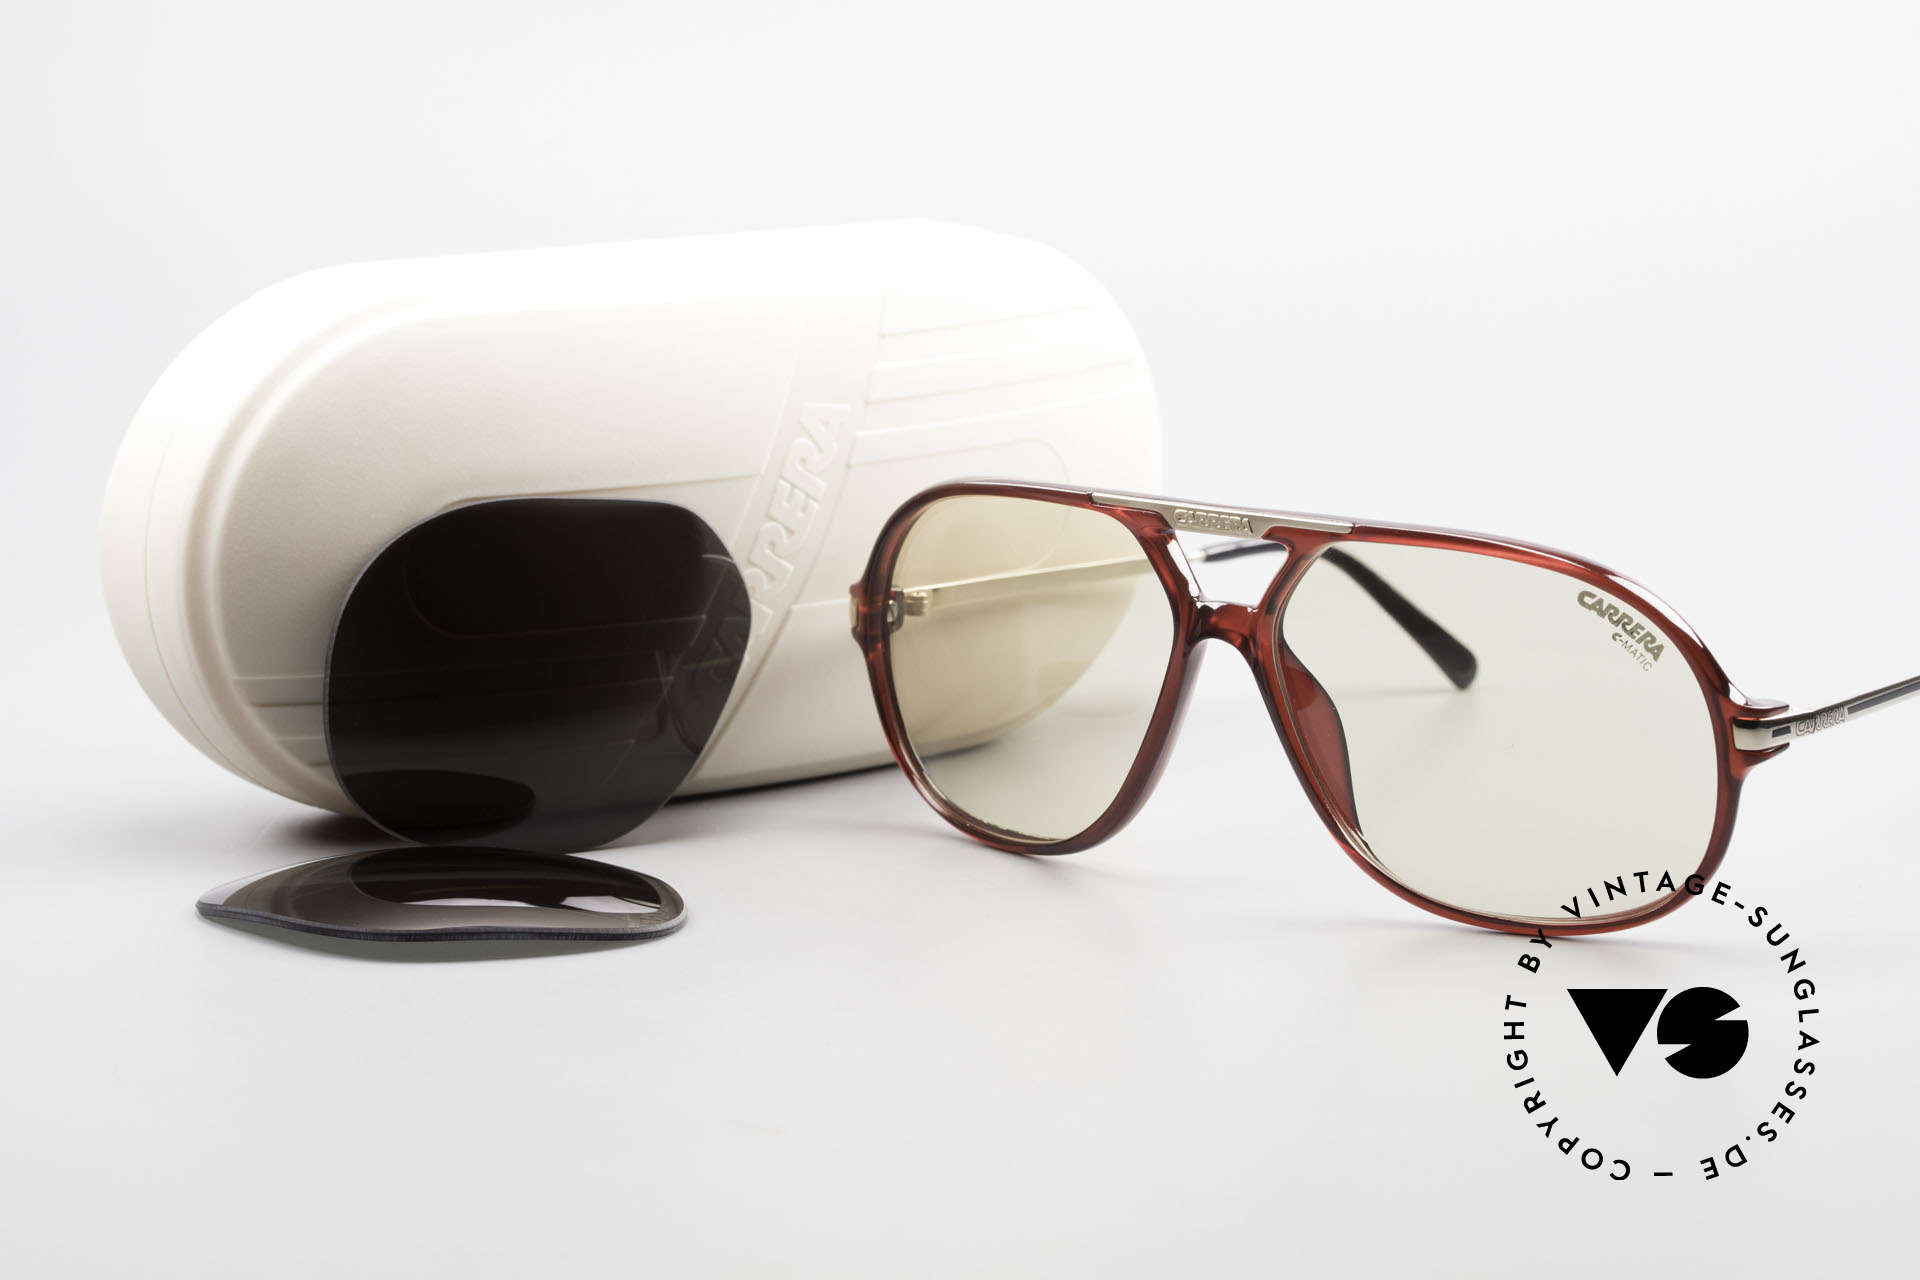 Carrera 5411 C-Matic Extra Changeable Sun Lenses, NO RETRO sunglasses, but a 30 years old ORIGINAL, Made for Men